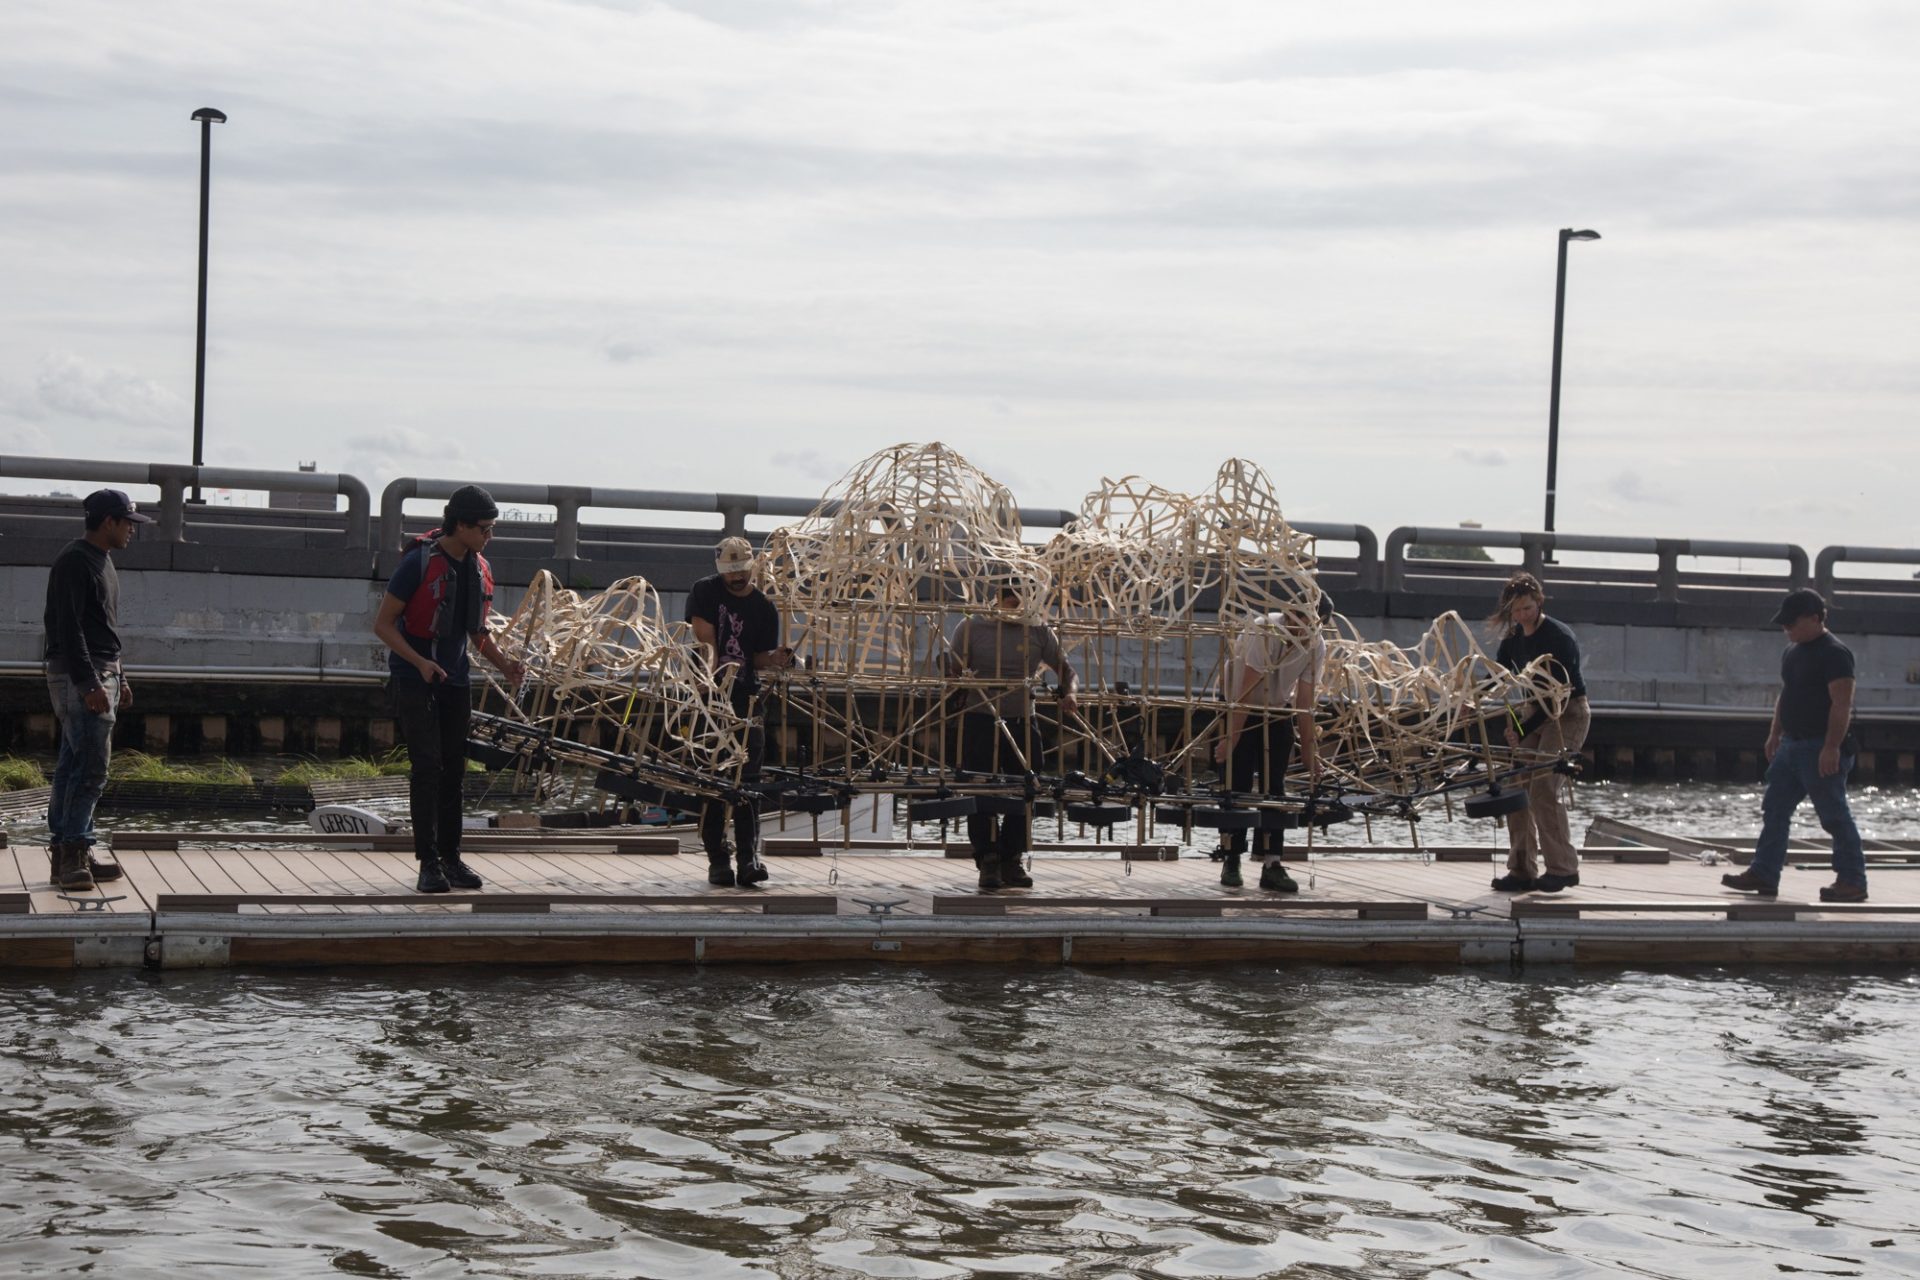 It takes four workers to lift and slowly introduce Talasnik's sculpture into the Delaware River boat basin.